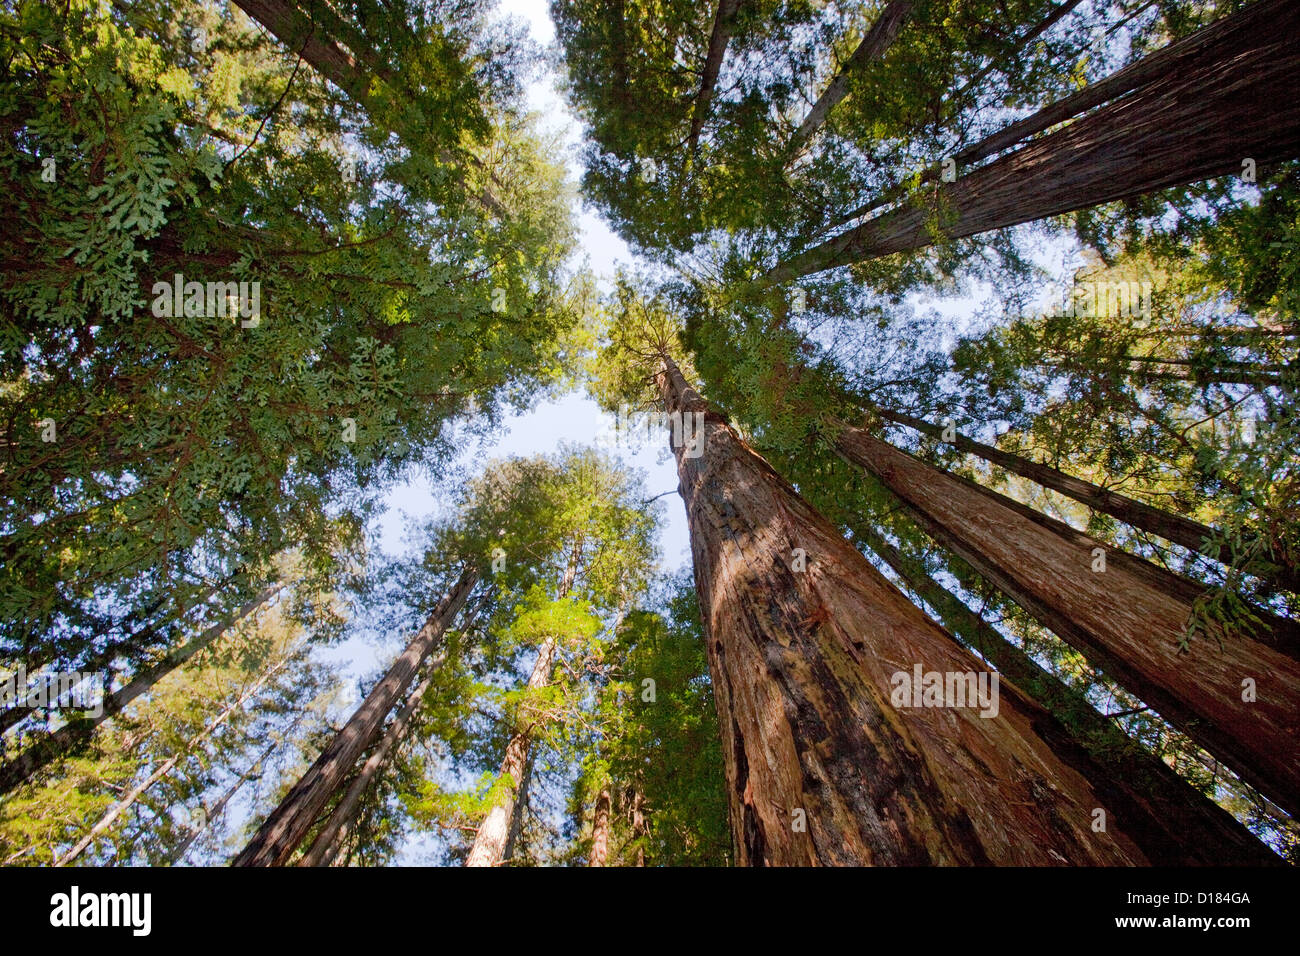 View from the bottom of a redwood tree forest looking to the tops. Yosemite National Park. Stock Photo